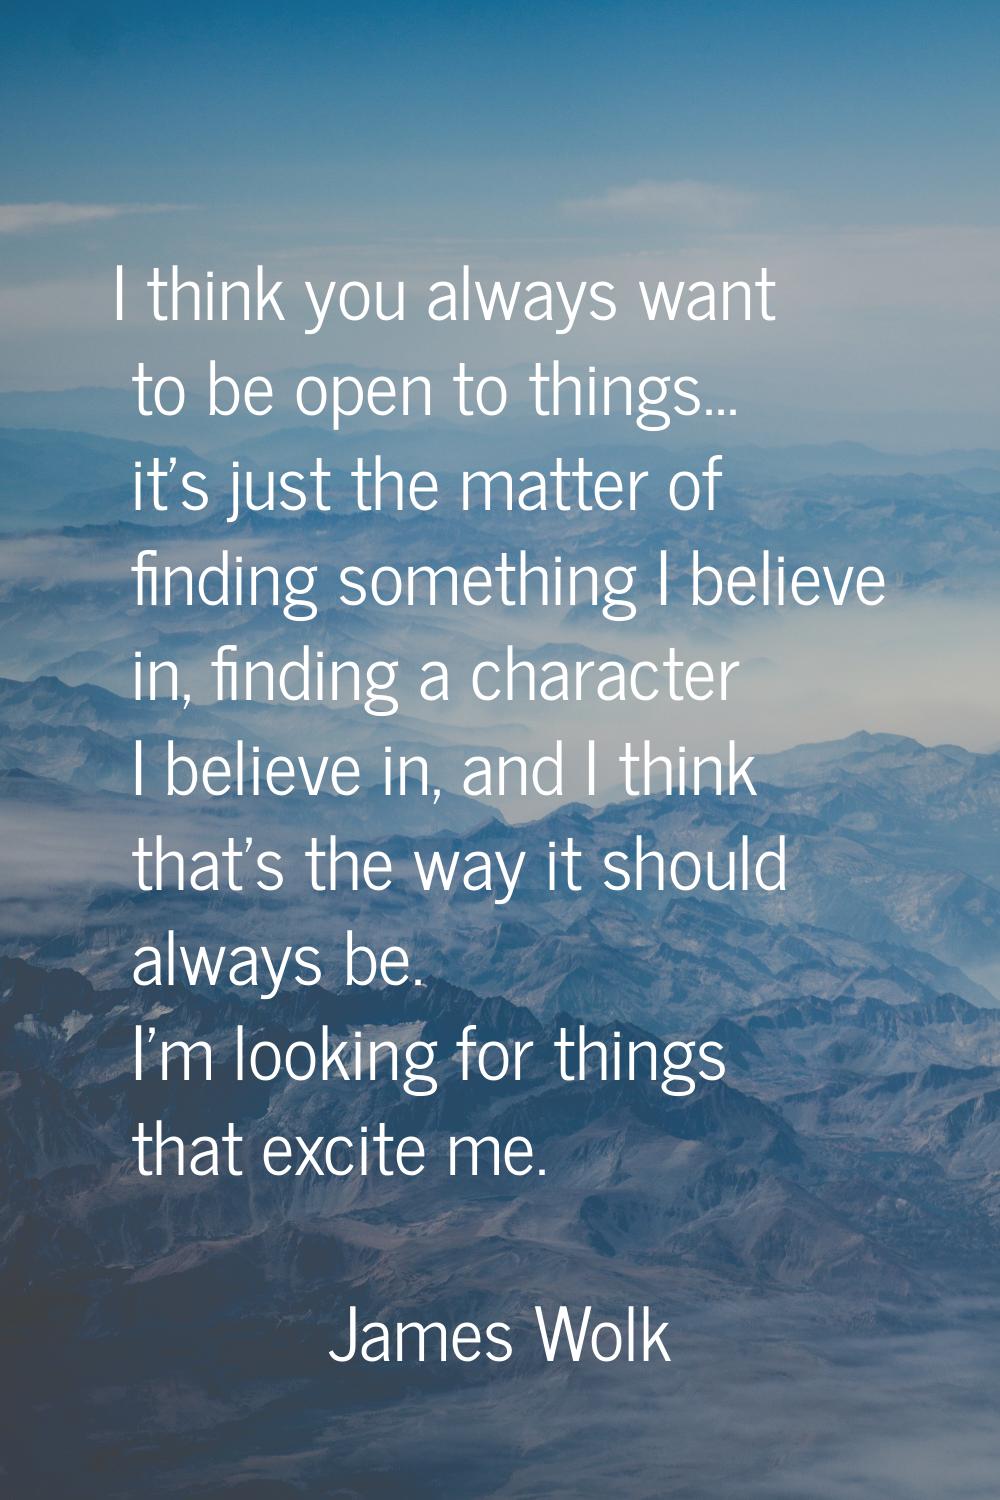 I think you always want to be open to things... it's just the matter of finding something I believe